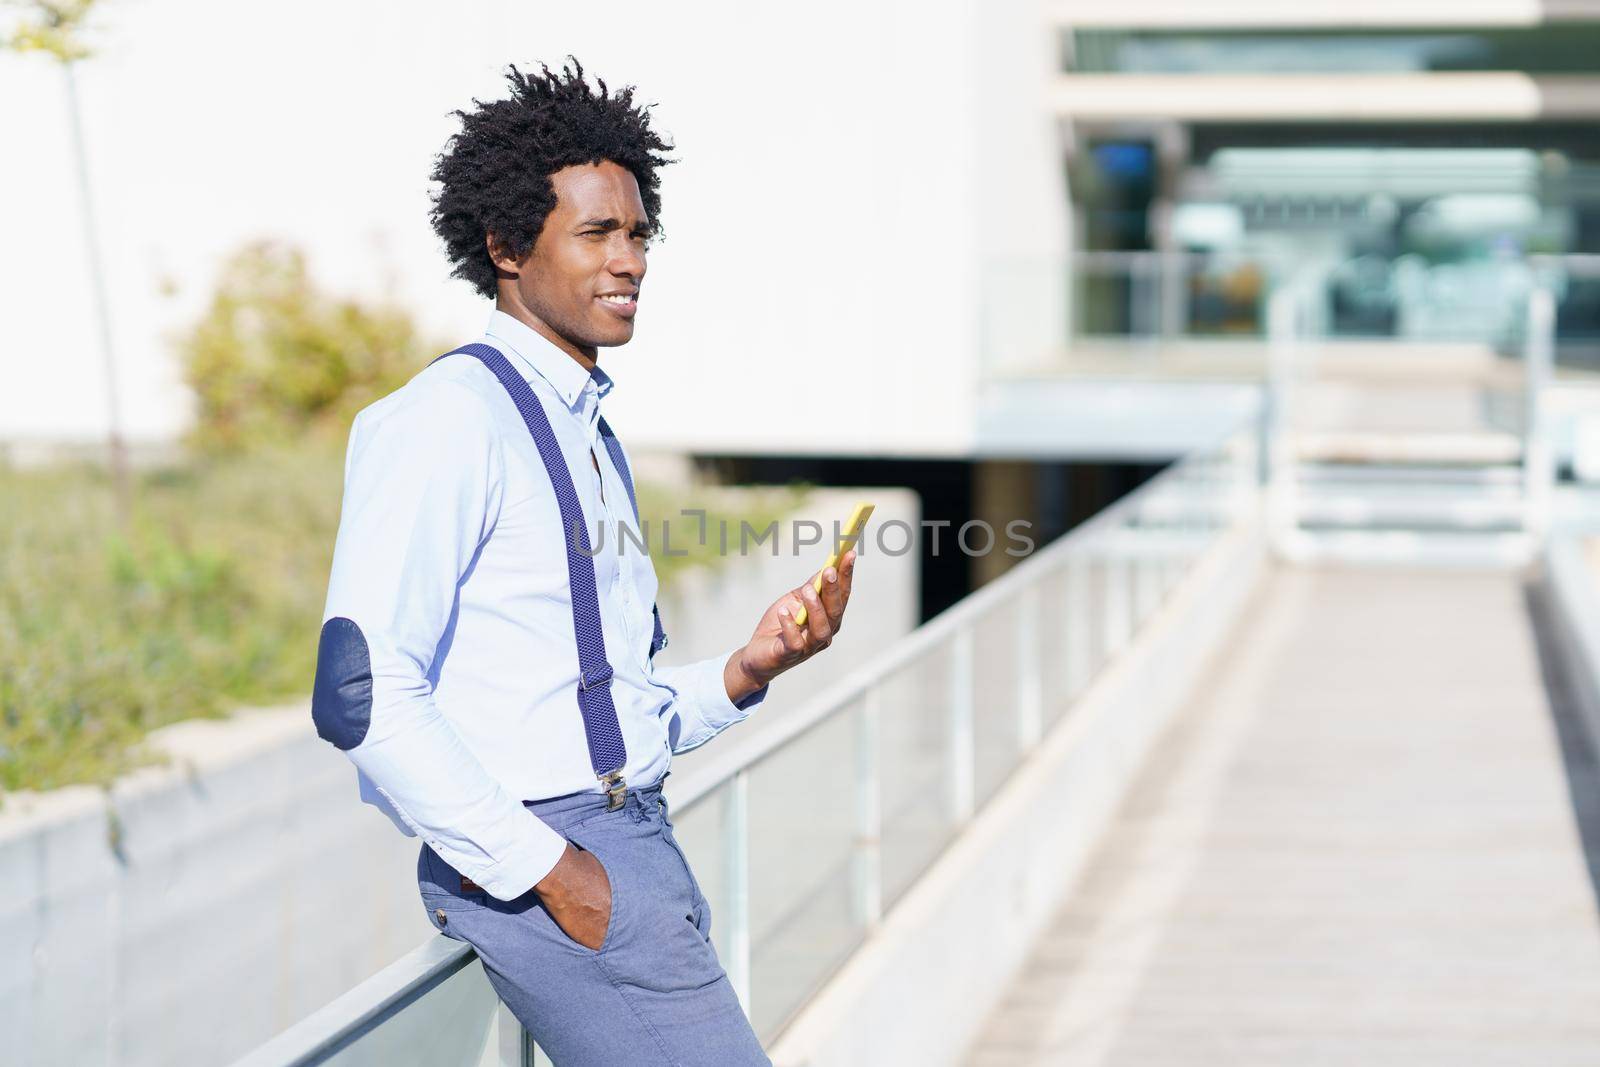 Black man with afro hairstyle using a smartphone near an office building. by javiindy